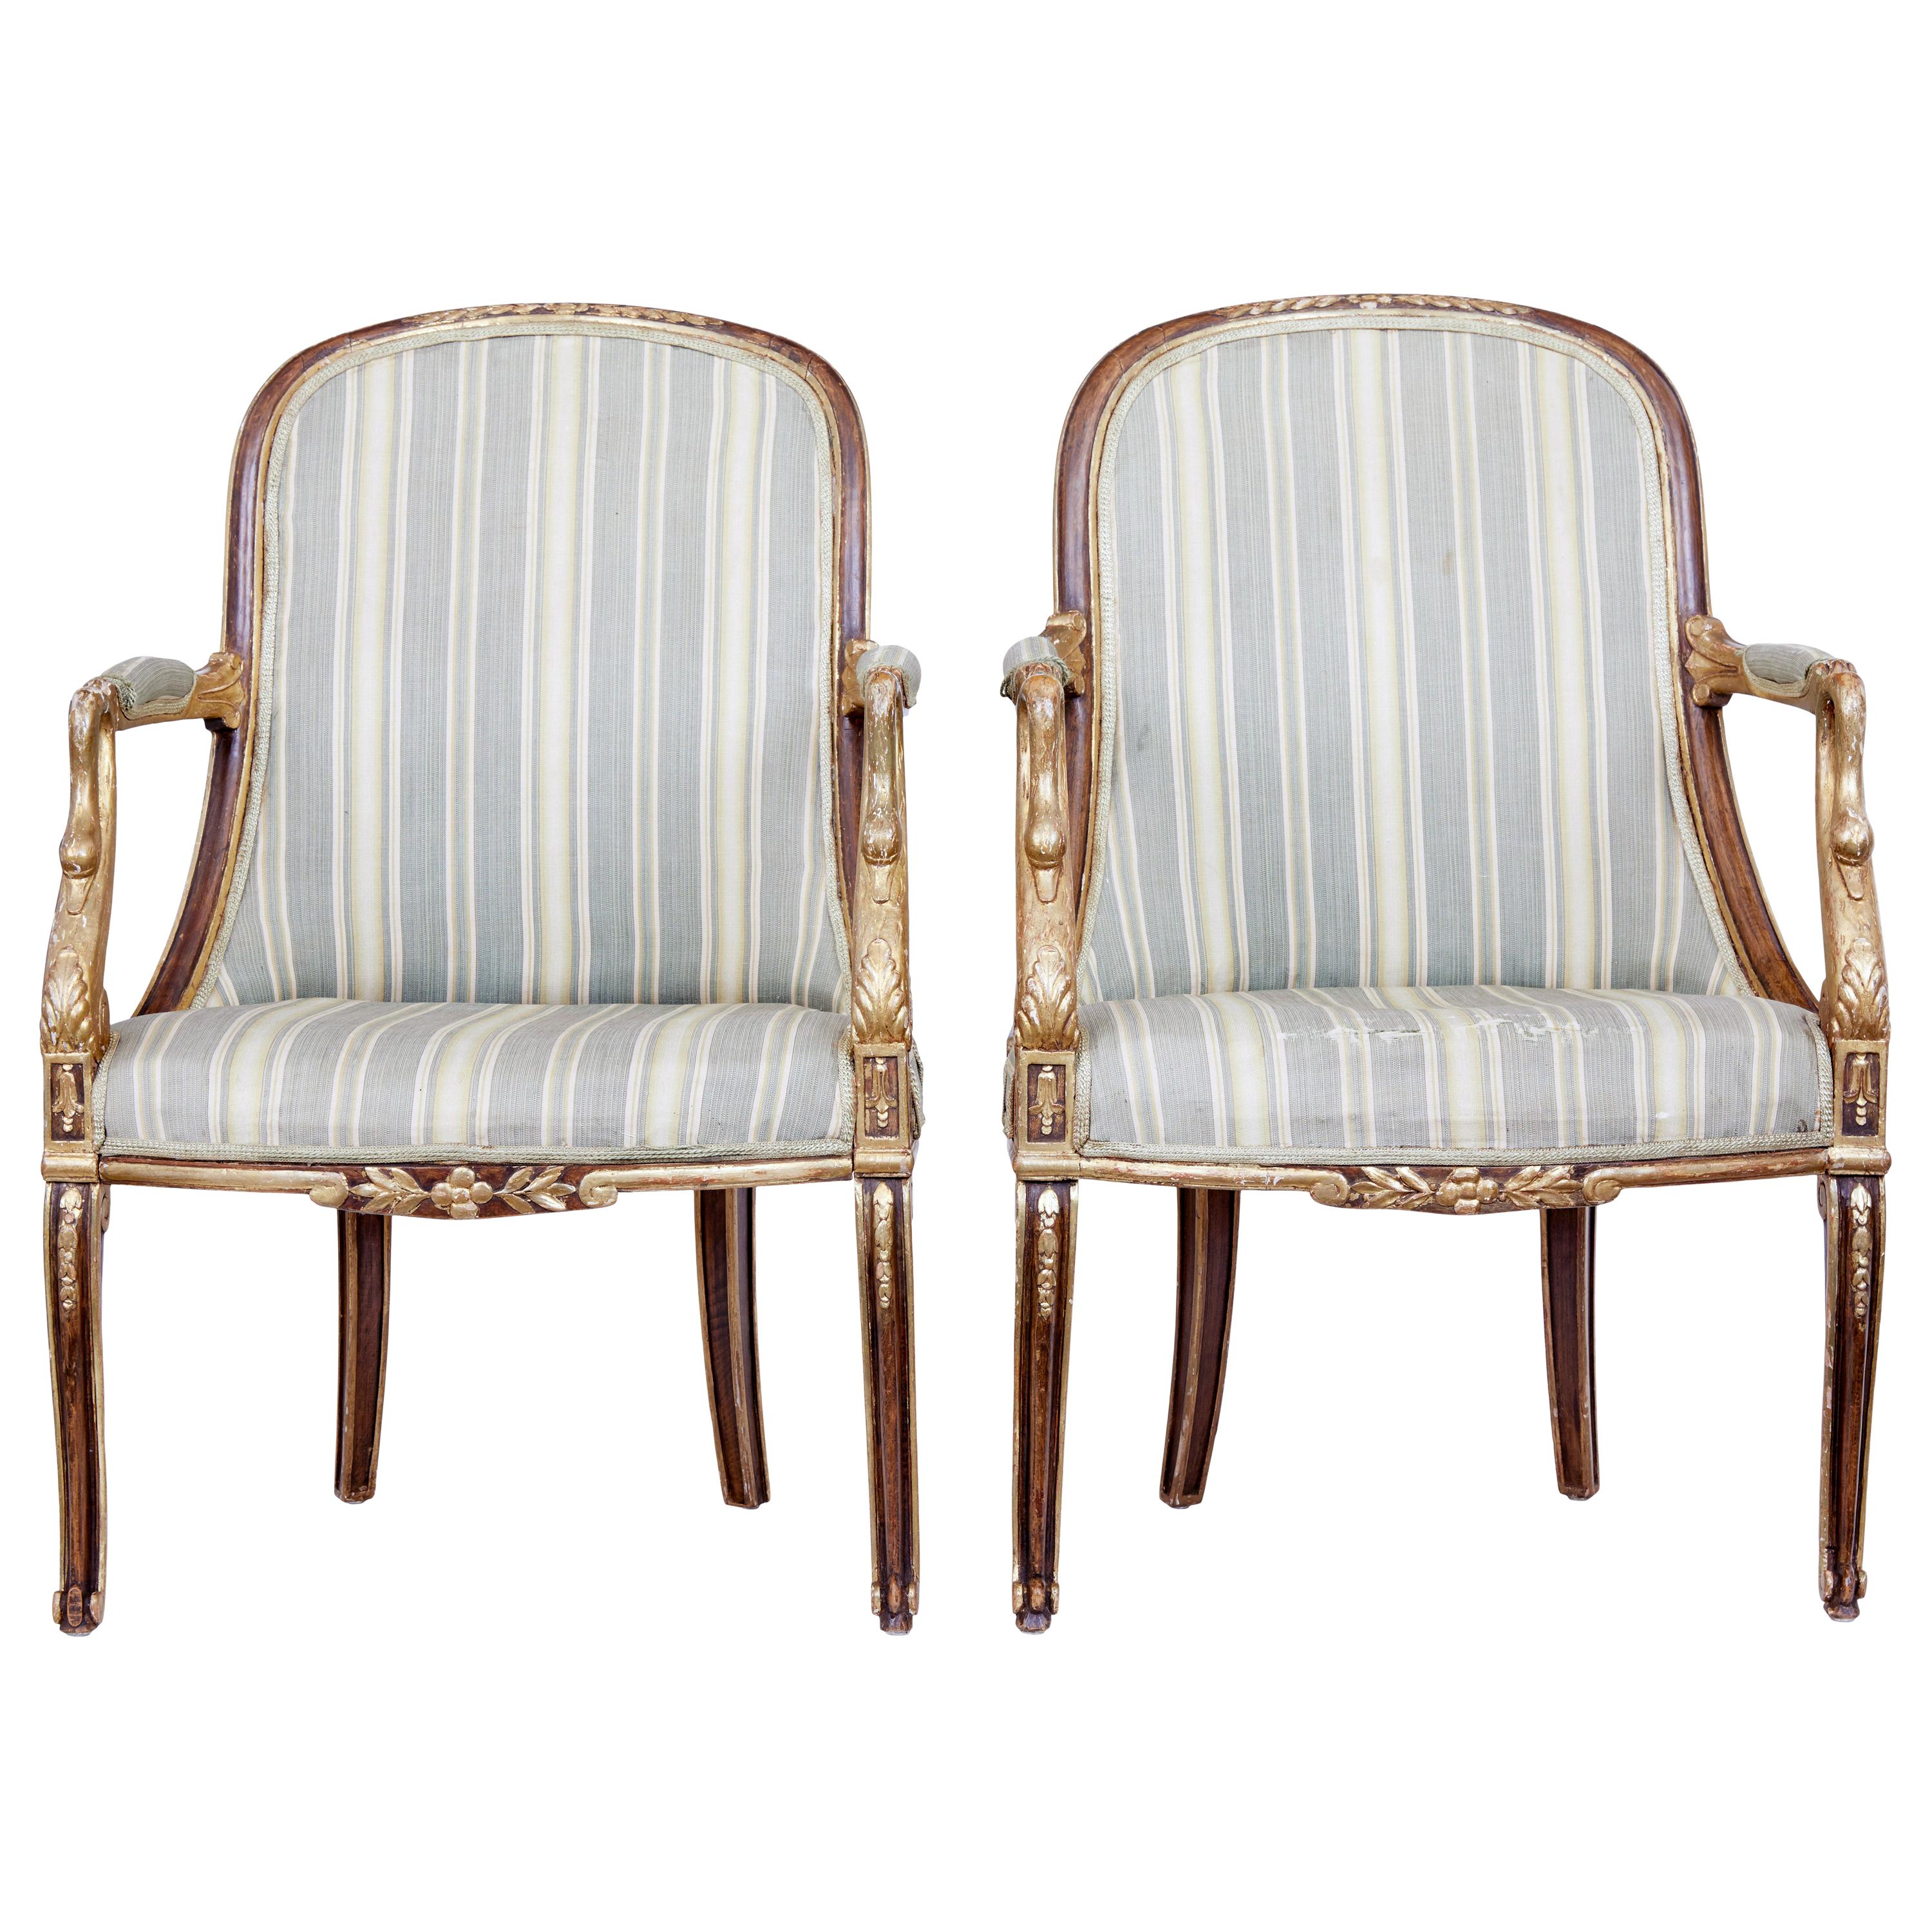 Pair of Mid-19th Century French Walnut and Gilt Armchairs